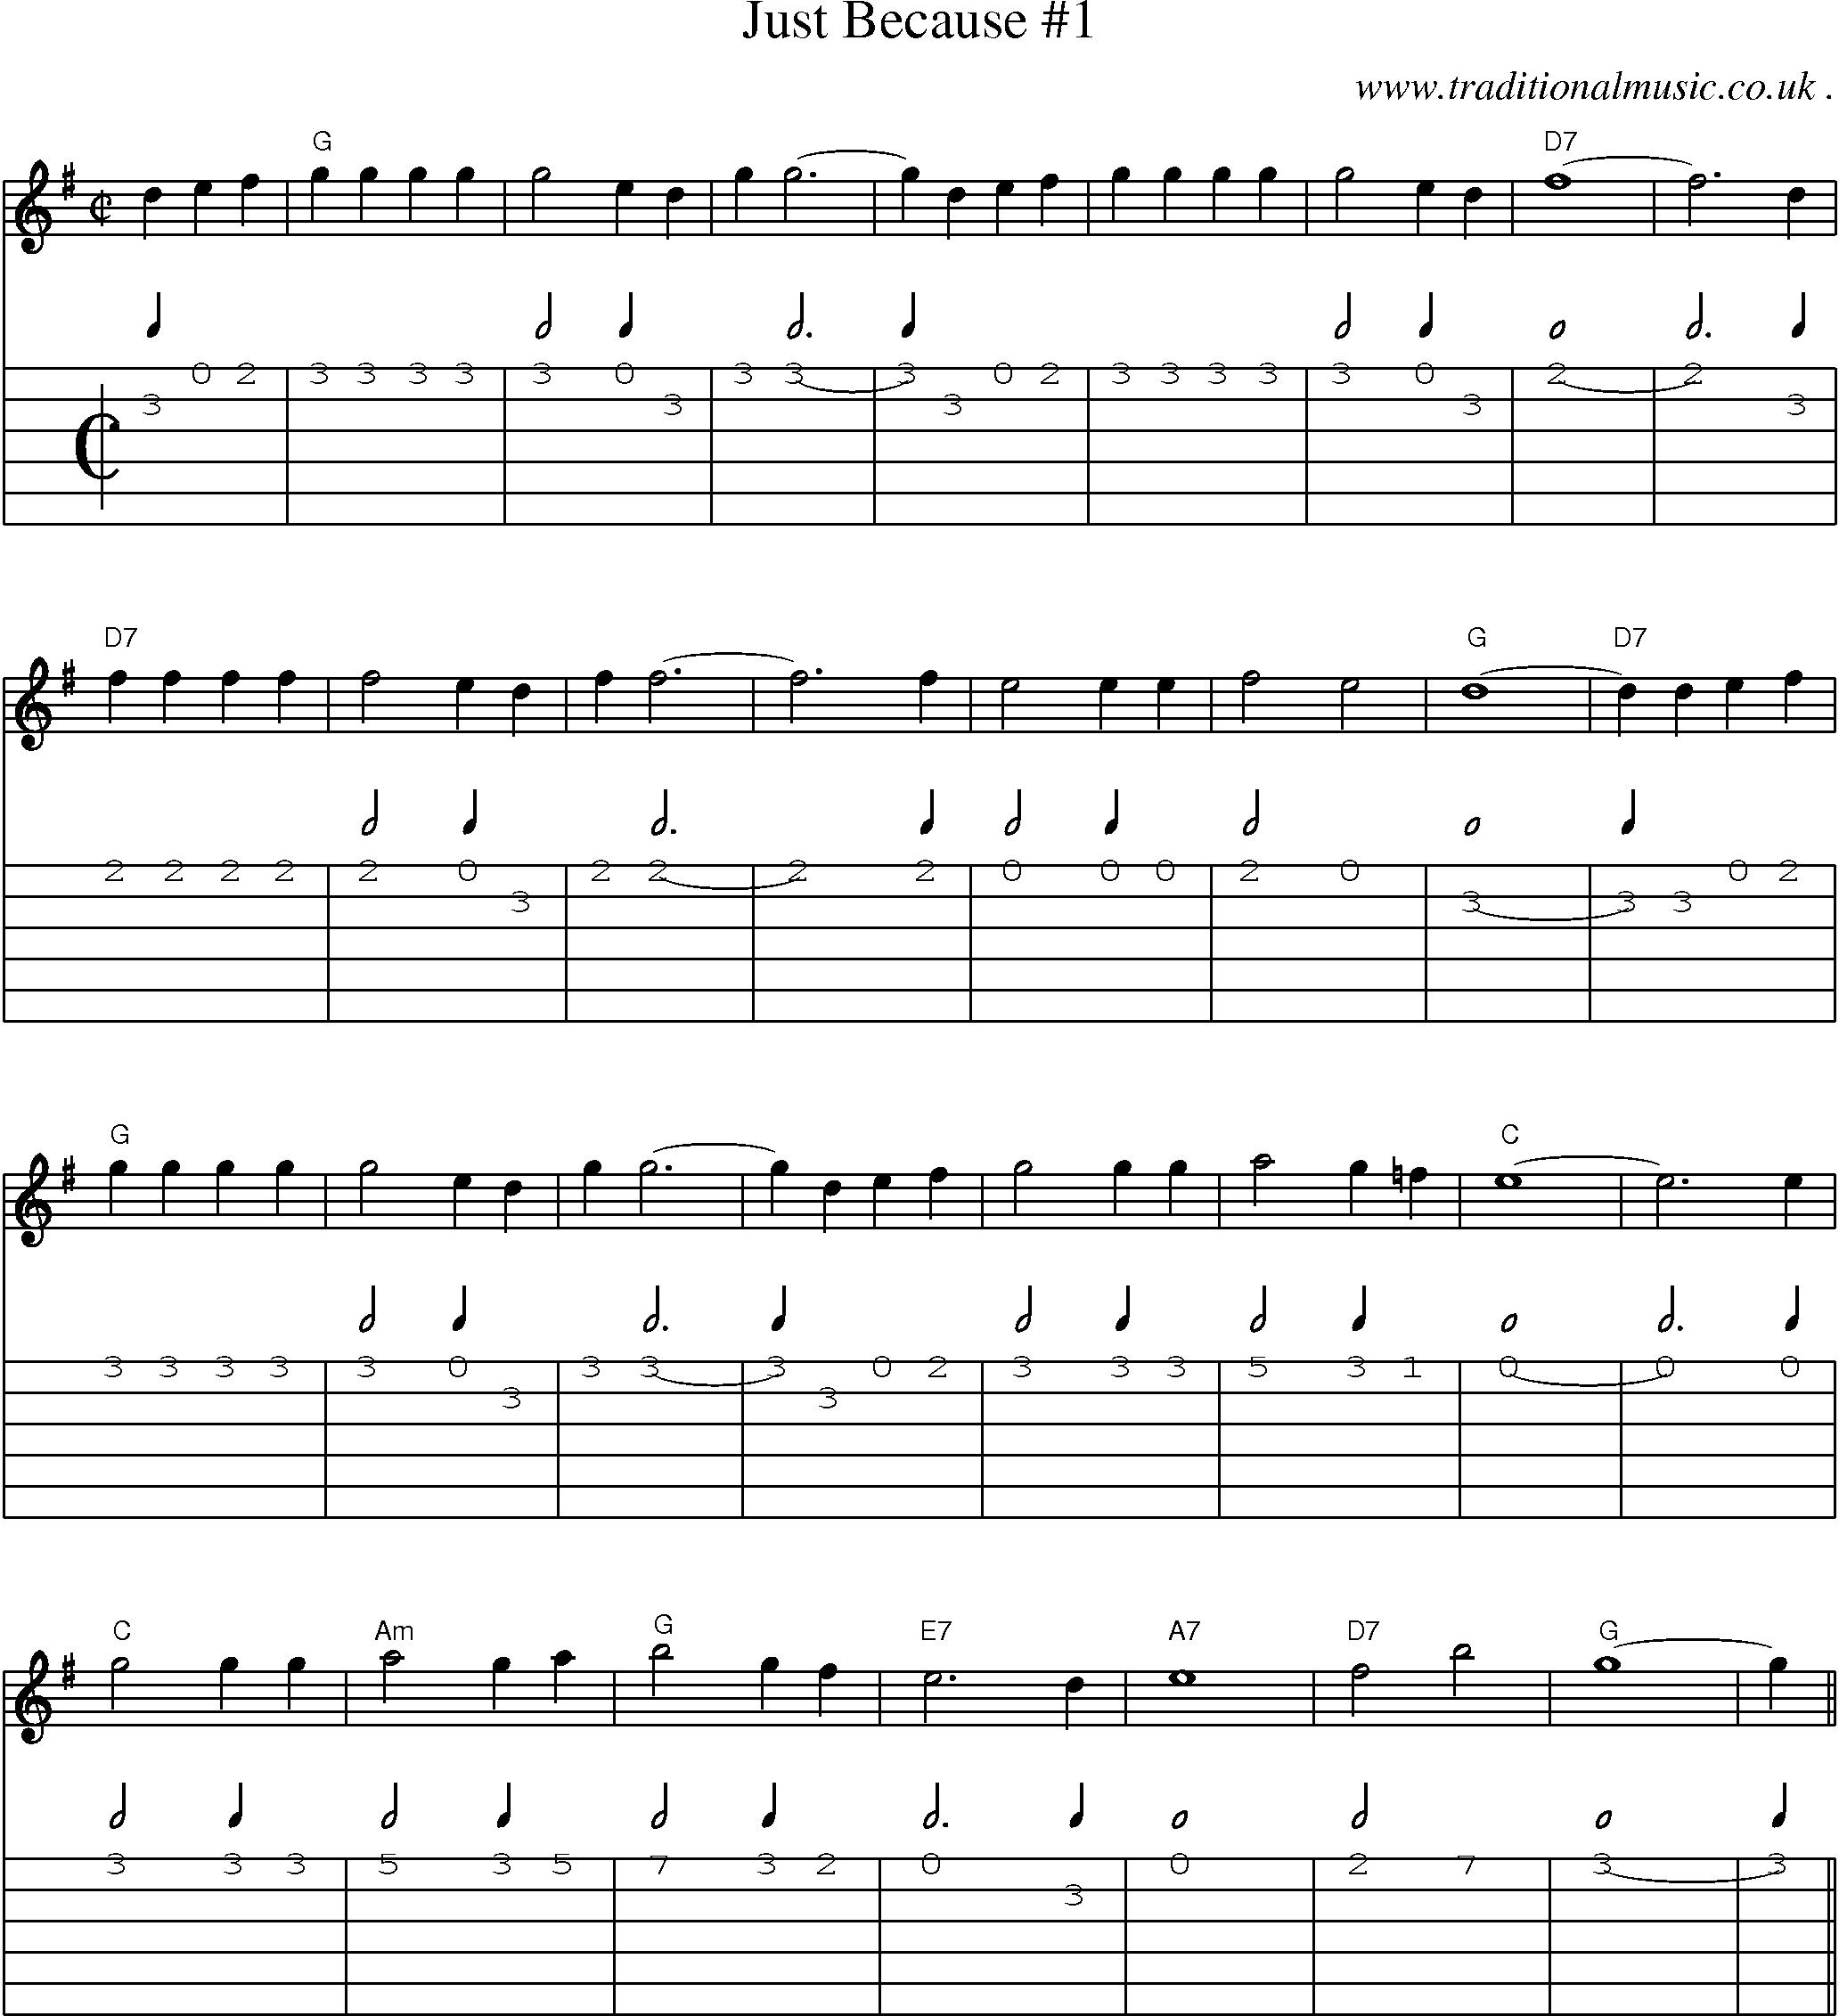 Music Score and Guitar Tabs for Just Because 1